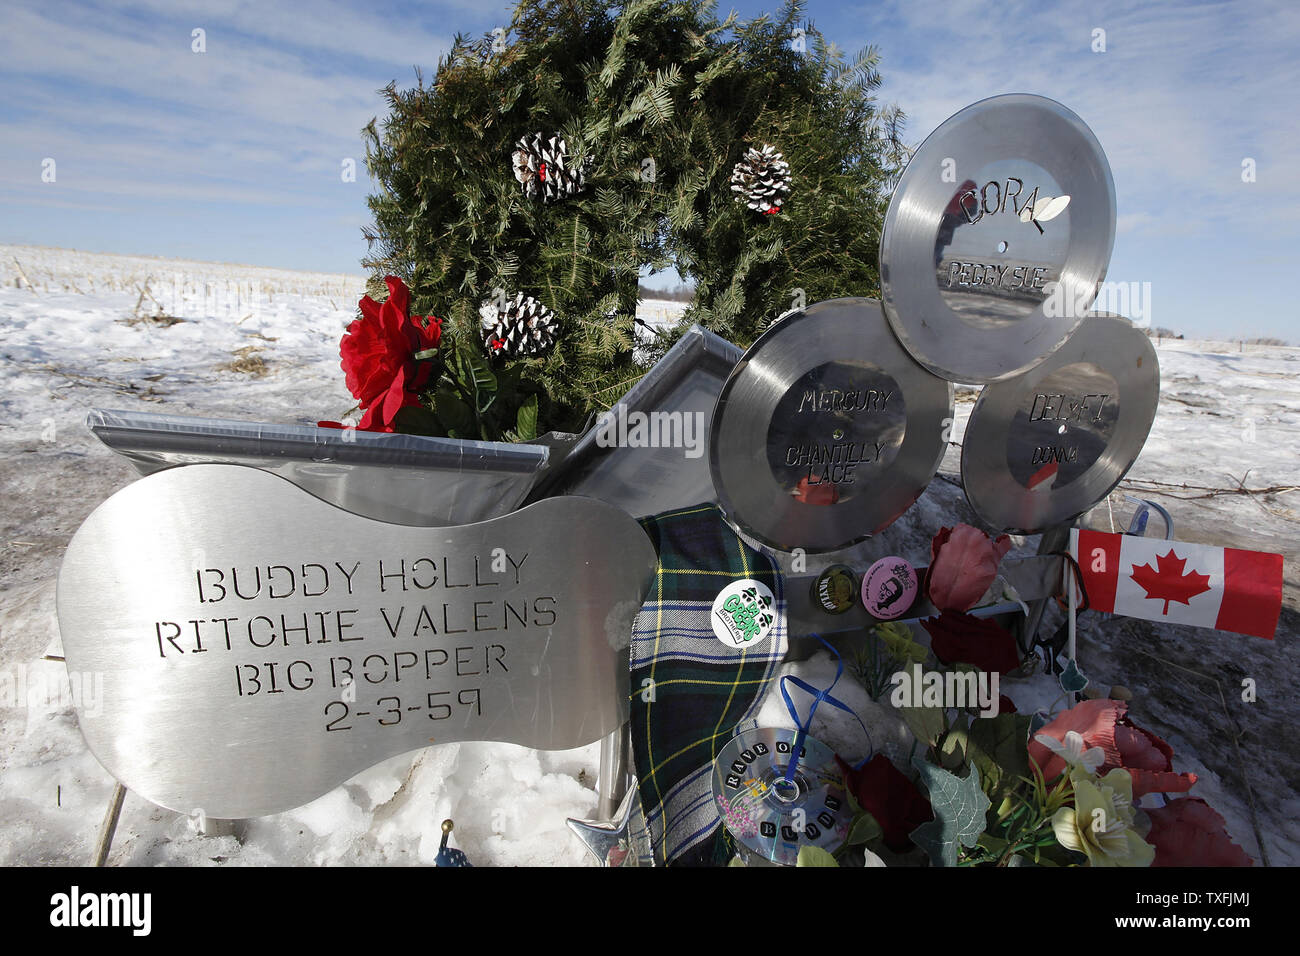 Flowers and tributes are left at the site of the plane crash that killed Buddy Holly, Ritchie Valens and J. P. 'The Big Bopper' Richardson near Clear Lake, Iowa on February 2, 2009. Singer Don McLean coined the phrase 'the day the music died' in his hit song American Pie referring to the death of the three rock 'n' roll pioneers in the early morning hours of February 3, 1959. Thousands of people descended upon Clear Lake to celebrate the 50th anniversary of 'the day the music died'.   (UPI Photo/Brian Kersey) Stock Photo